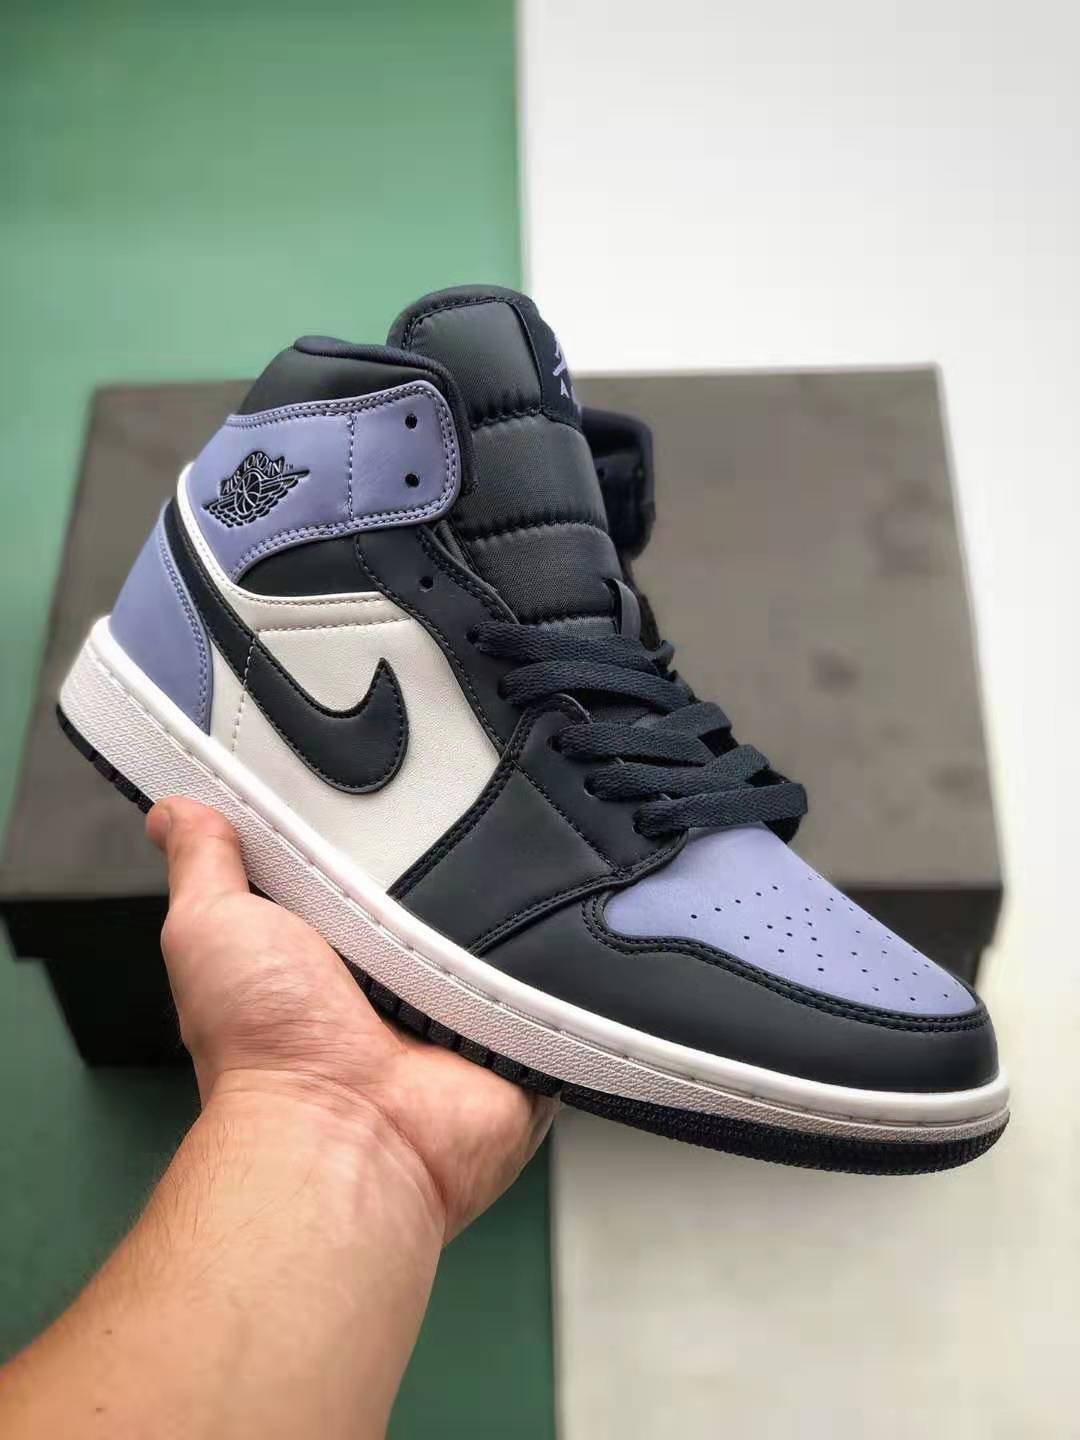 Air Jordan 1 Mid 'Sanded Purple' 554724-445 - Get Stylish with the Classic Design